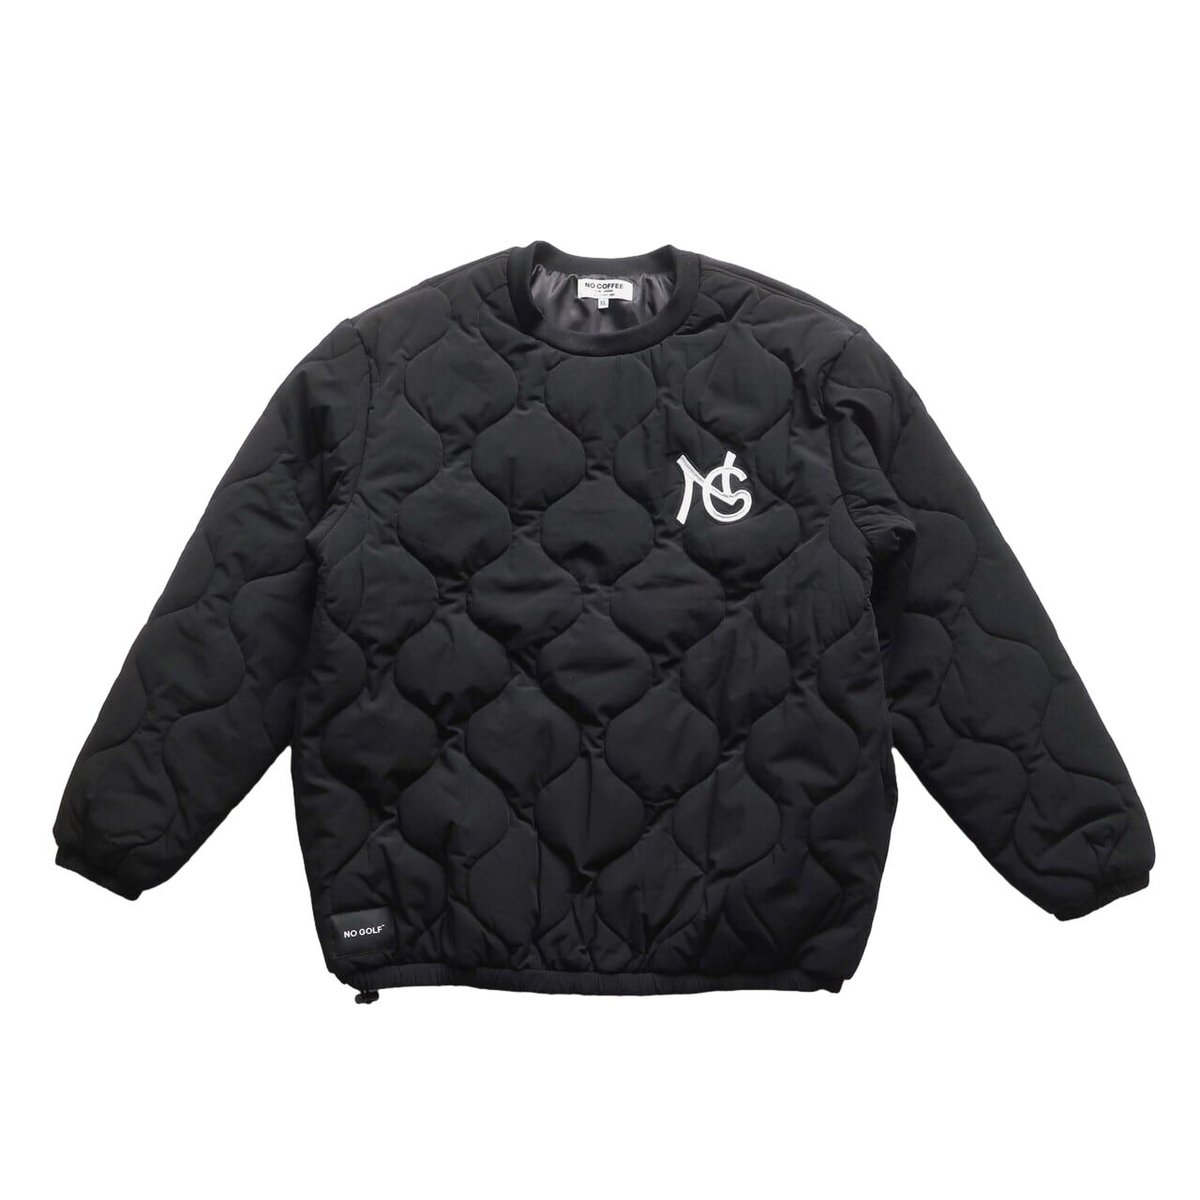 NO GOLF PADDED PISTE L/S - Black | CLUBHAUS | ク...